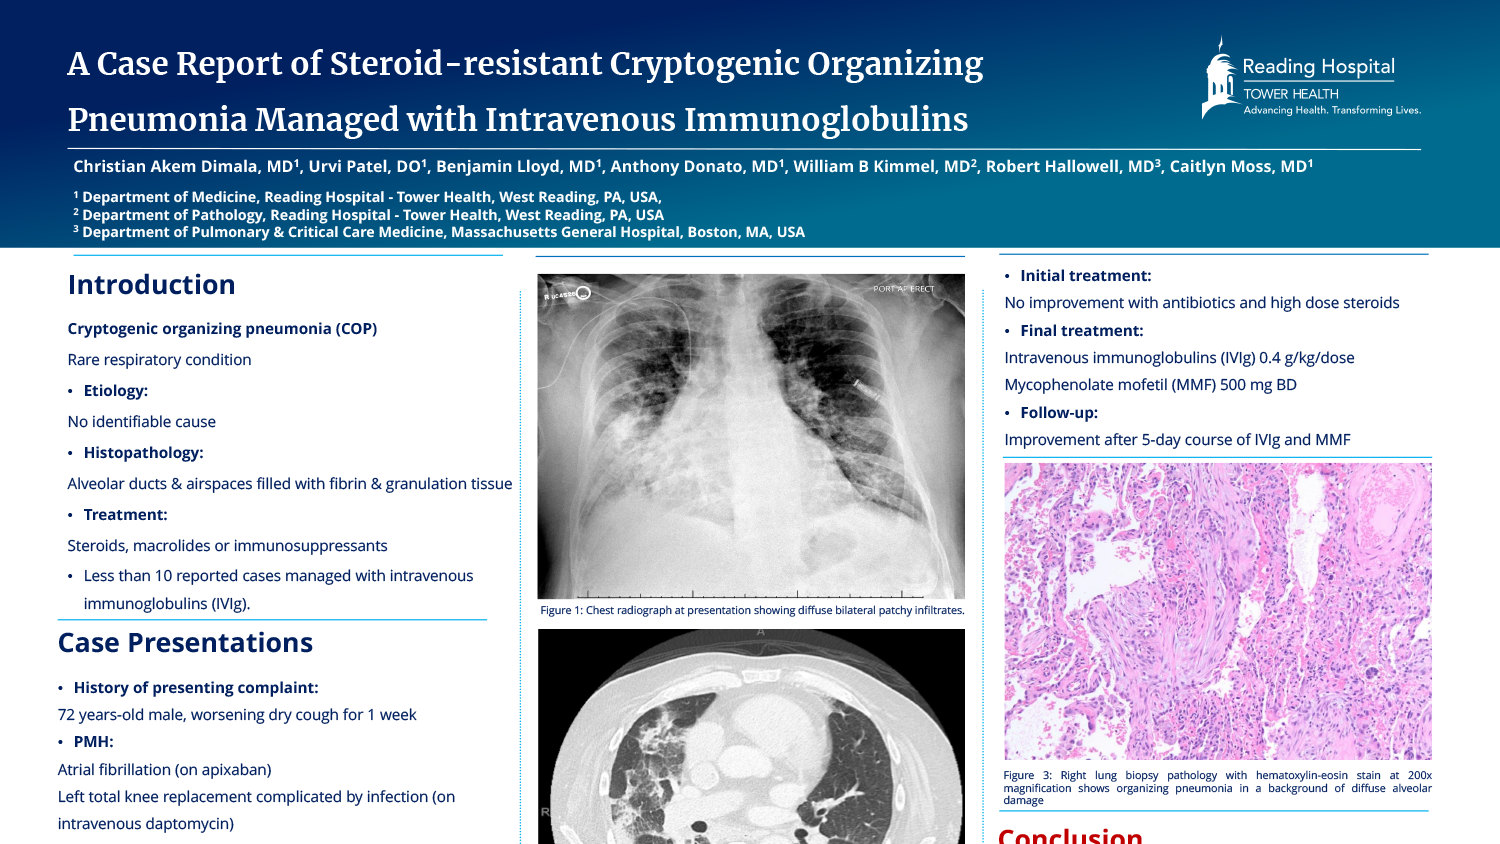 Christian Akem Dimala - PAE-14-A-Case-Report-of-Steroid-resistant-Cryptogenic-Organizing-Pneumonia-Managed-with-Intravenous-Immunoglobulins